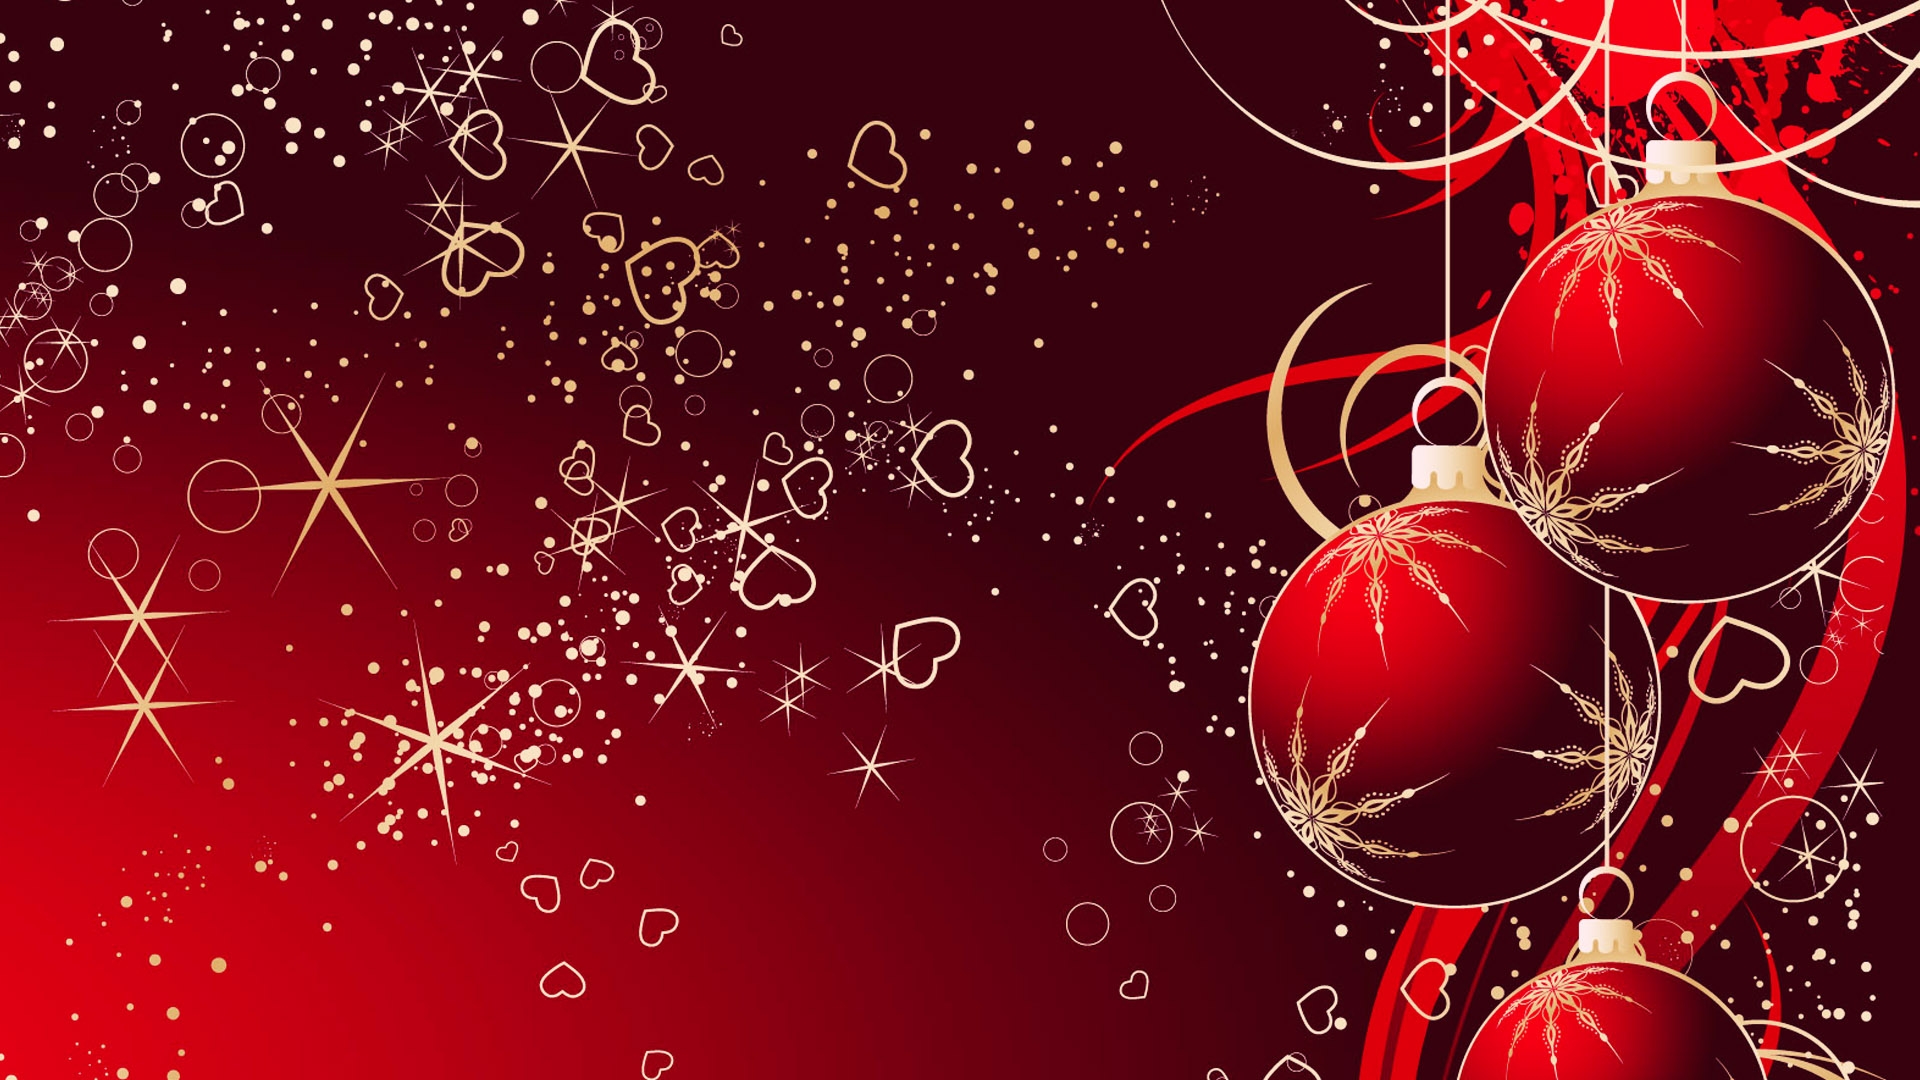 Christmas Wallpaper  Similar Results Search Results Christmas 